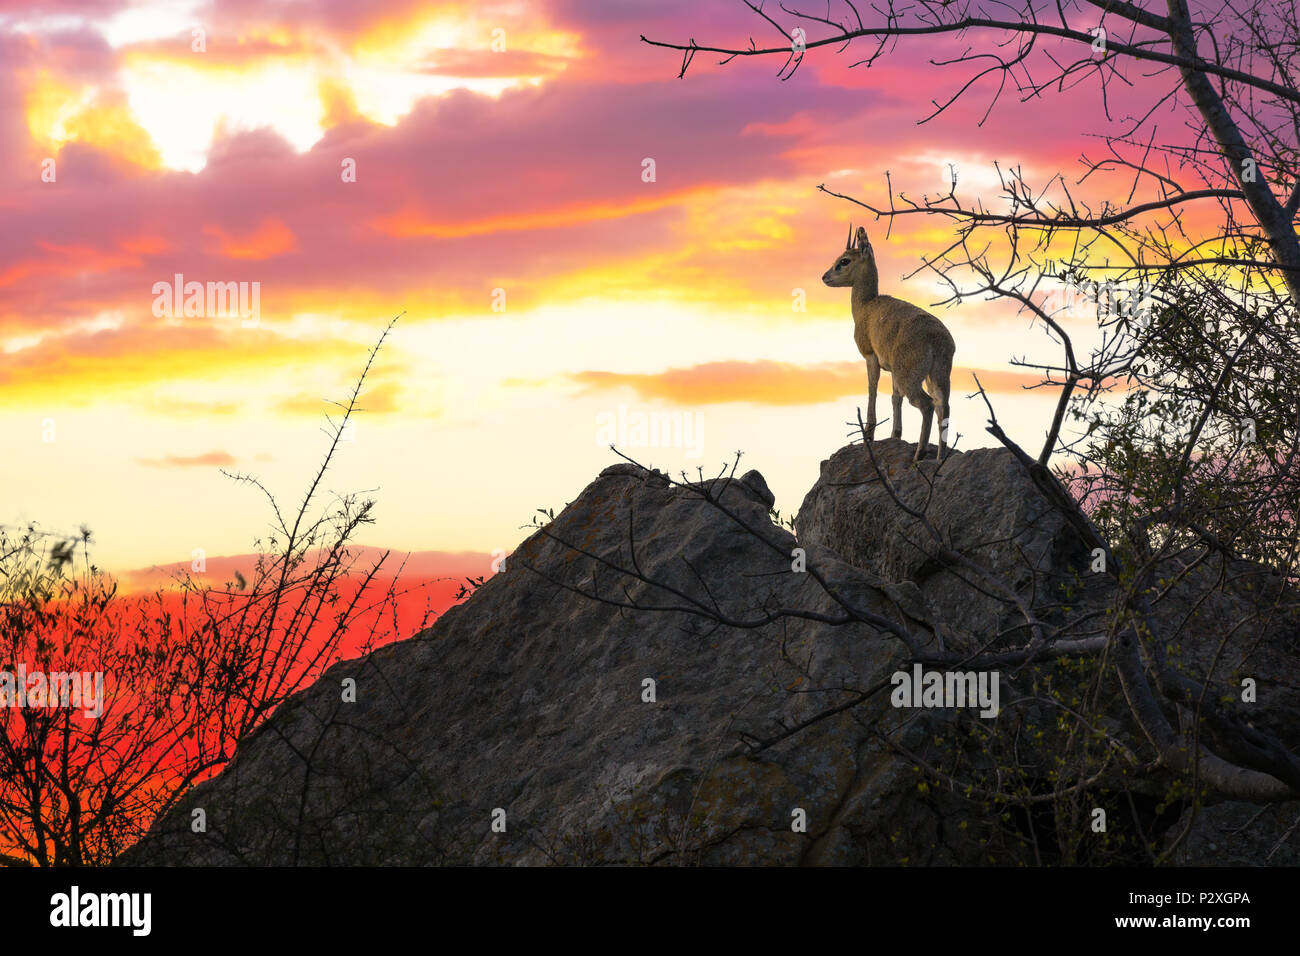 A solitary steenbok looks out from a rocky outcrop. Sunset in Kruger national park, South Africa. Stock Photo